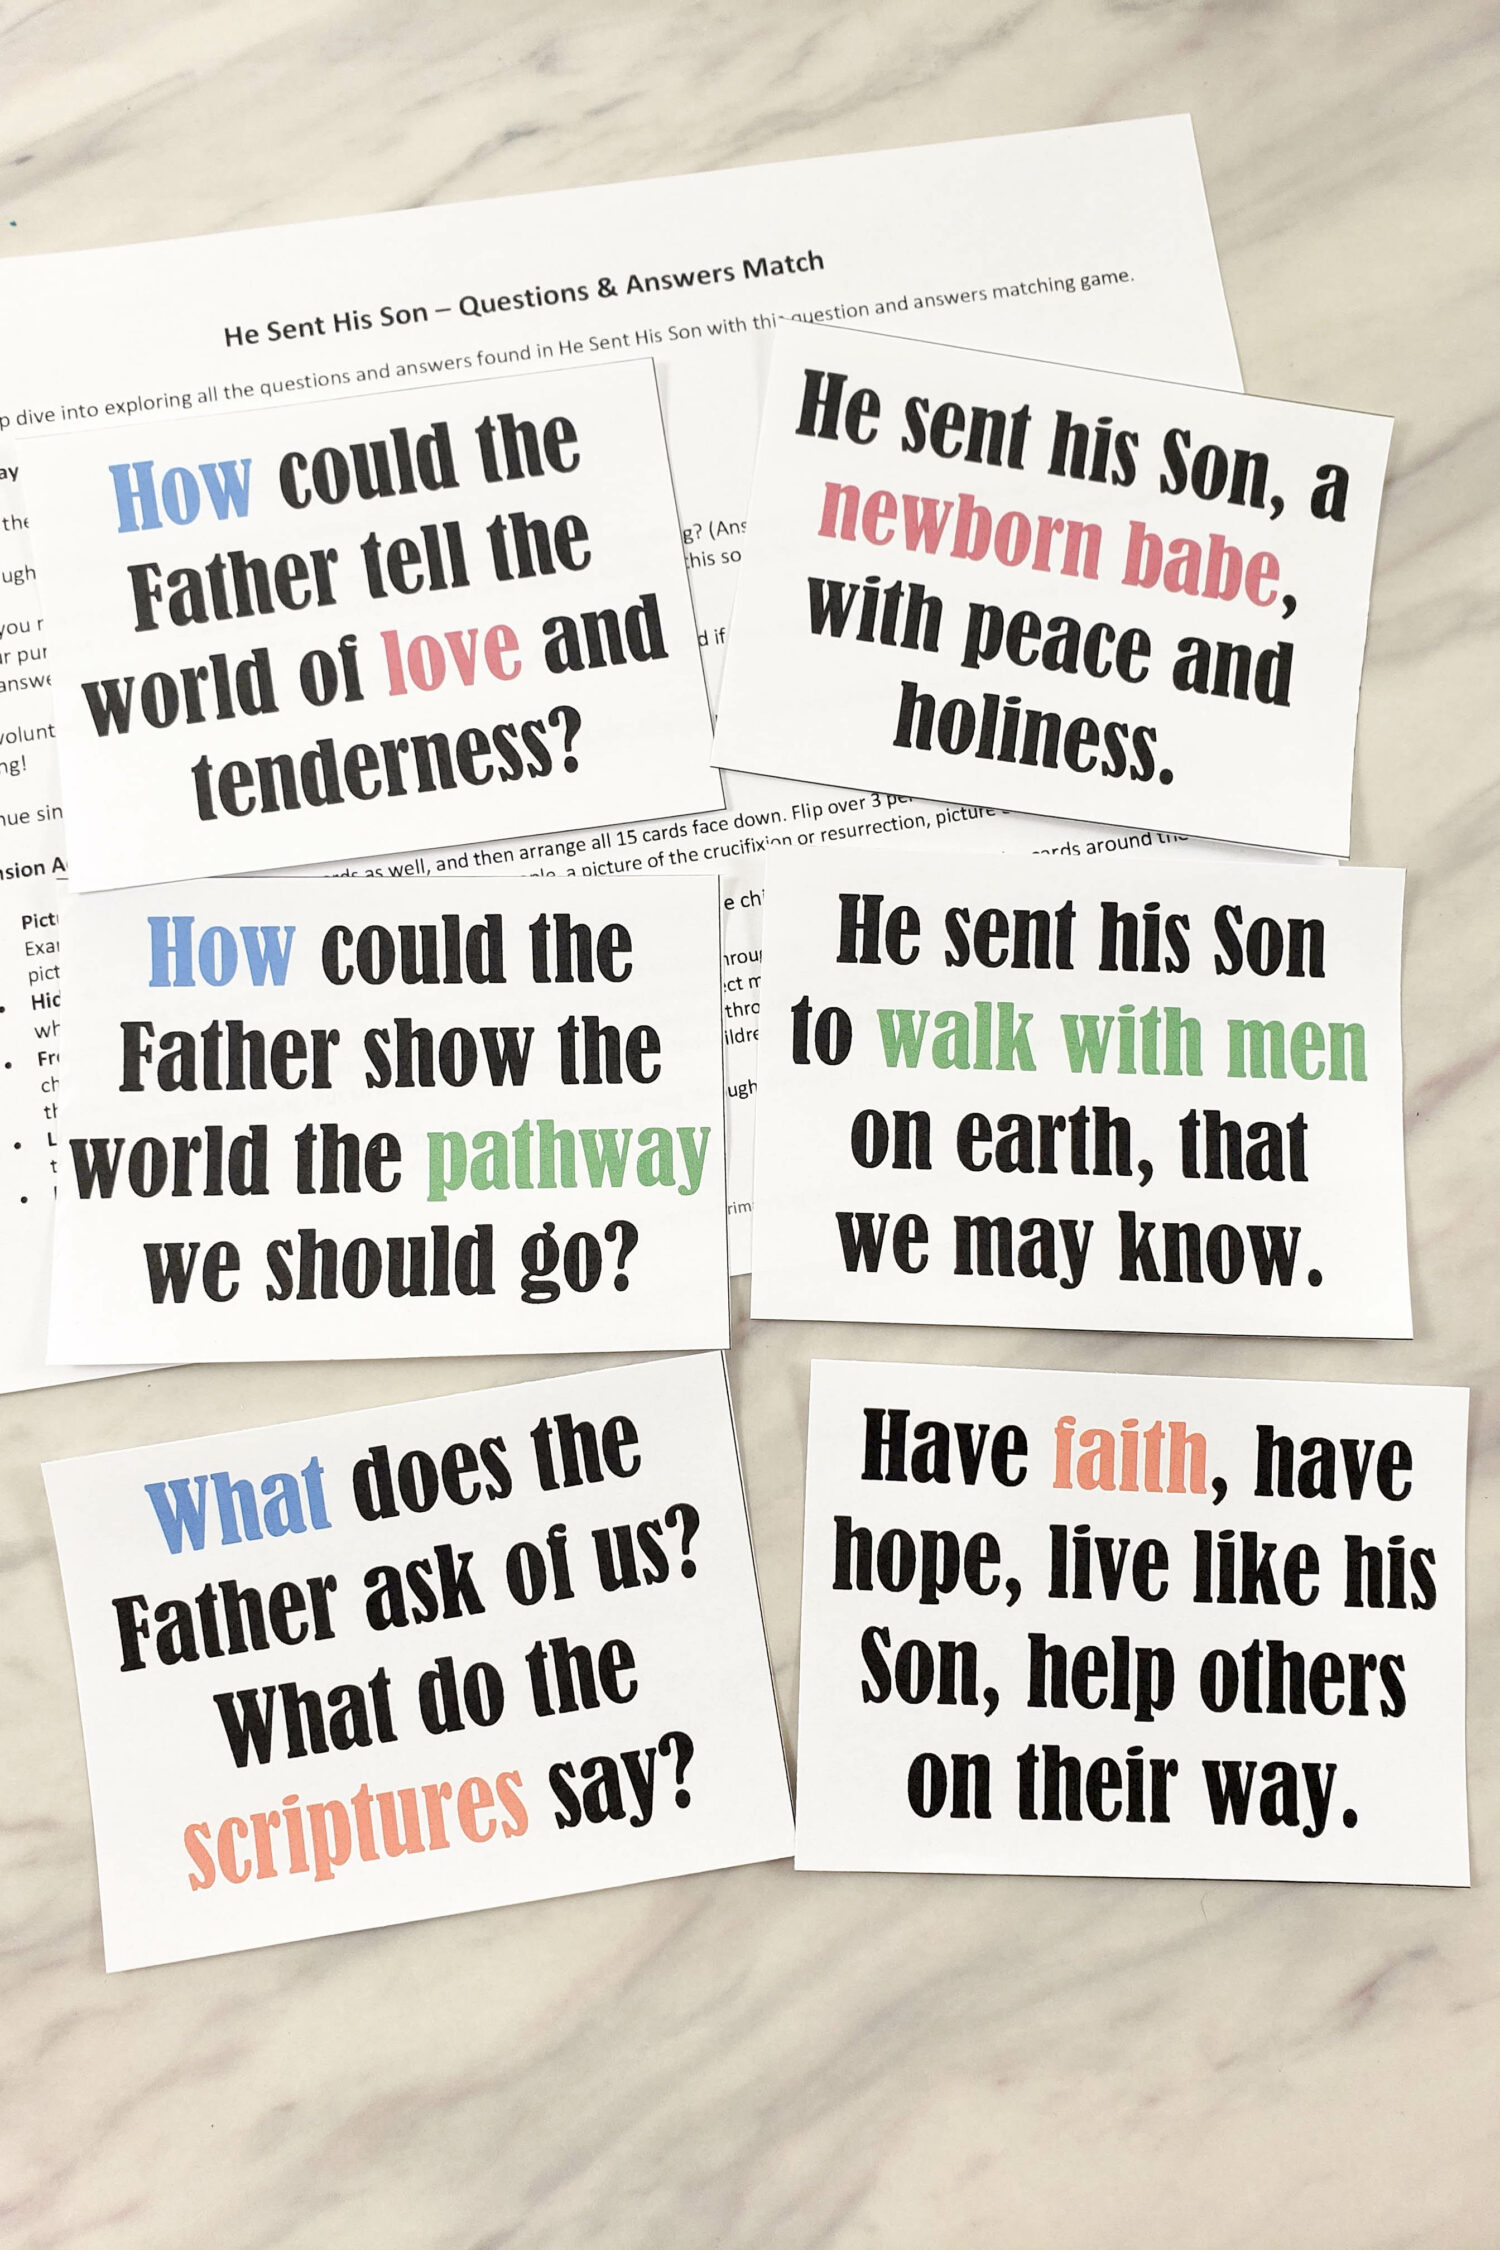 Teach He Sent His Son Questions & Answers Match in singing time with these printable song helps for LDS Primary Music Leaders with teaching activities.